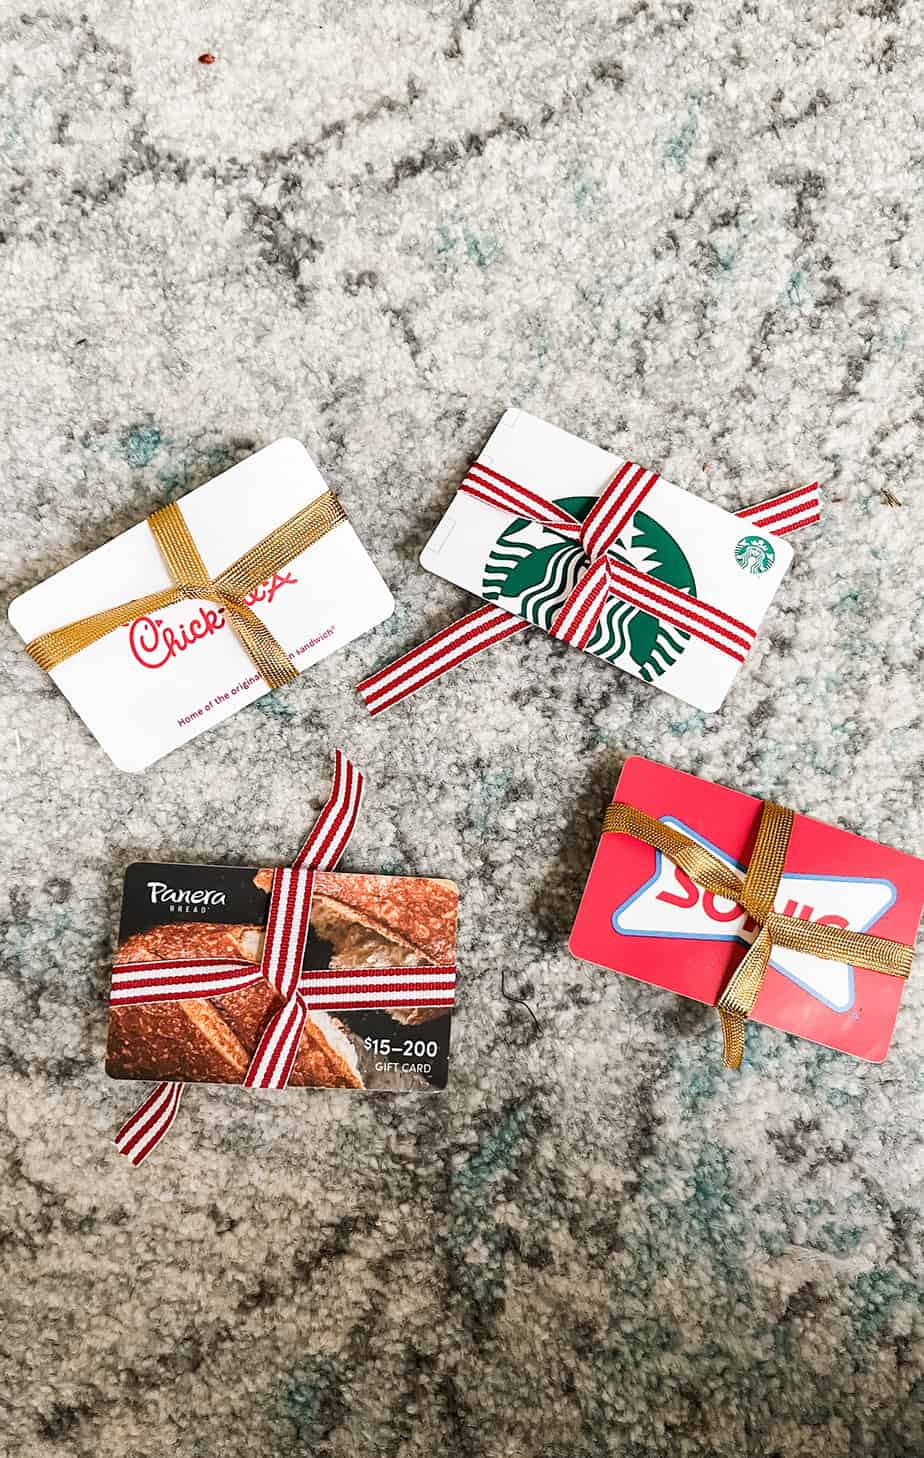 gift cards to chick-fil-a, starbucks, sonic, and panera with ribbon wrapped around them to look like presents laying on a cream and blue rug